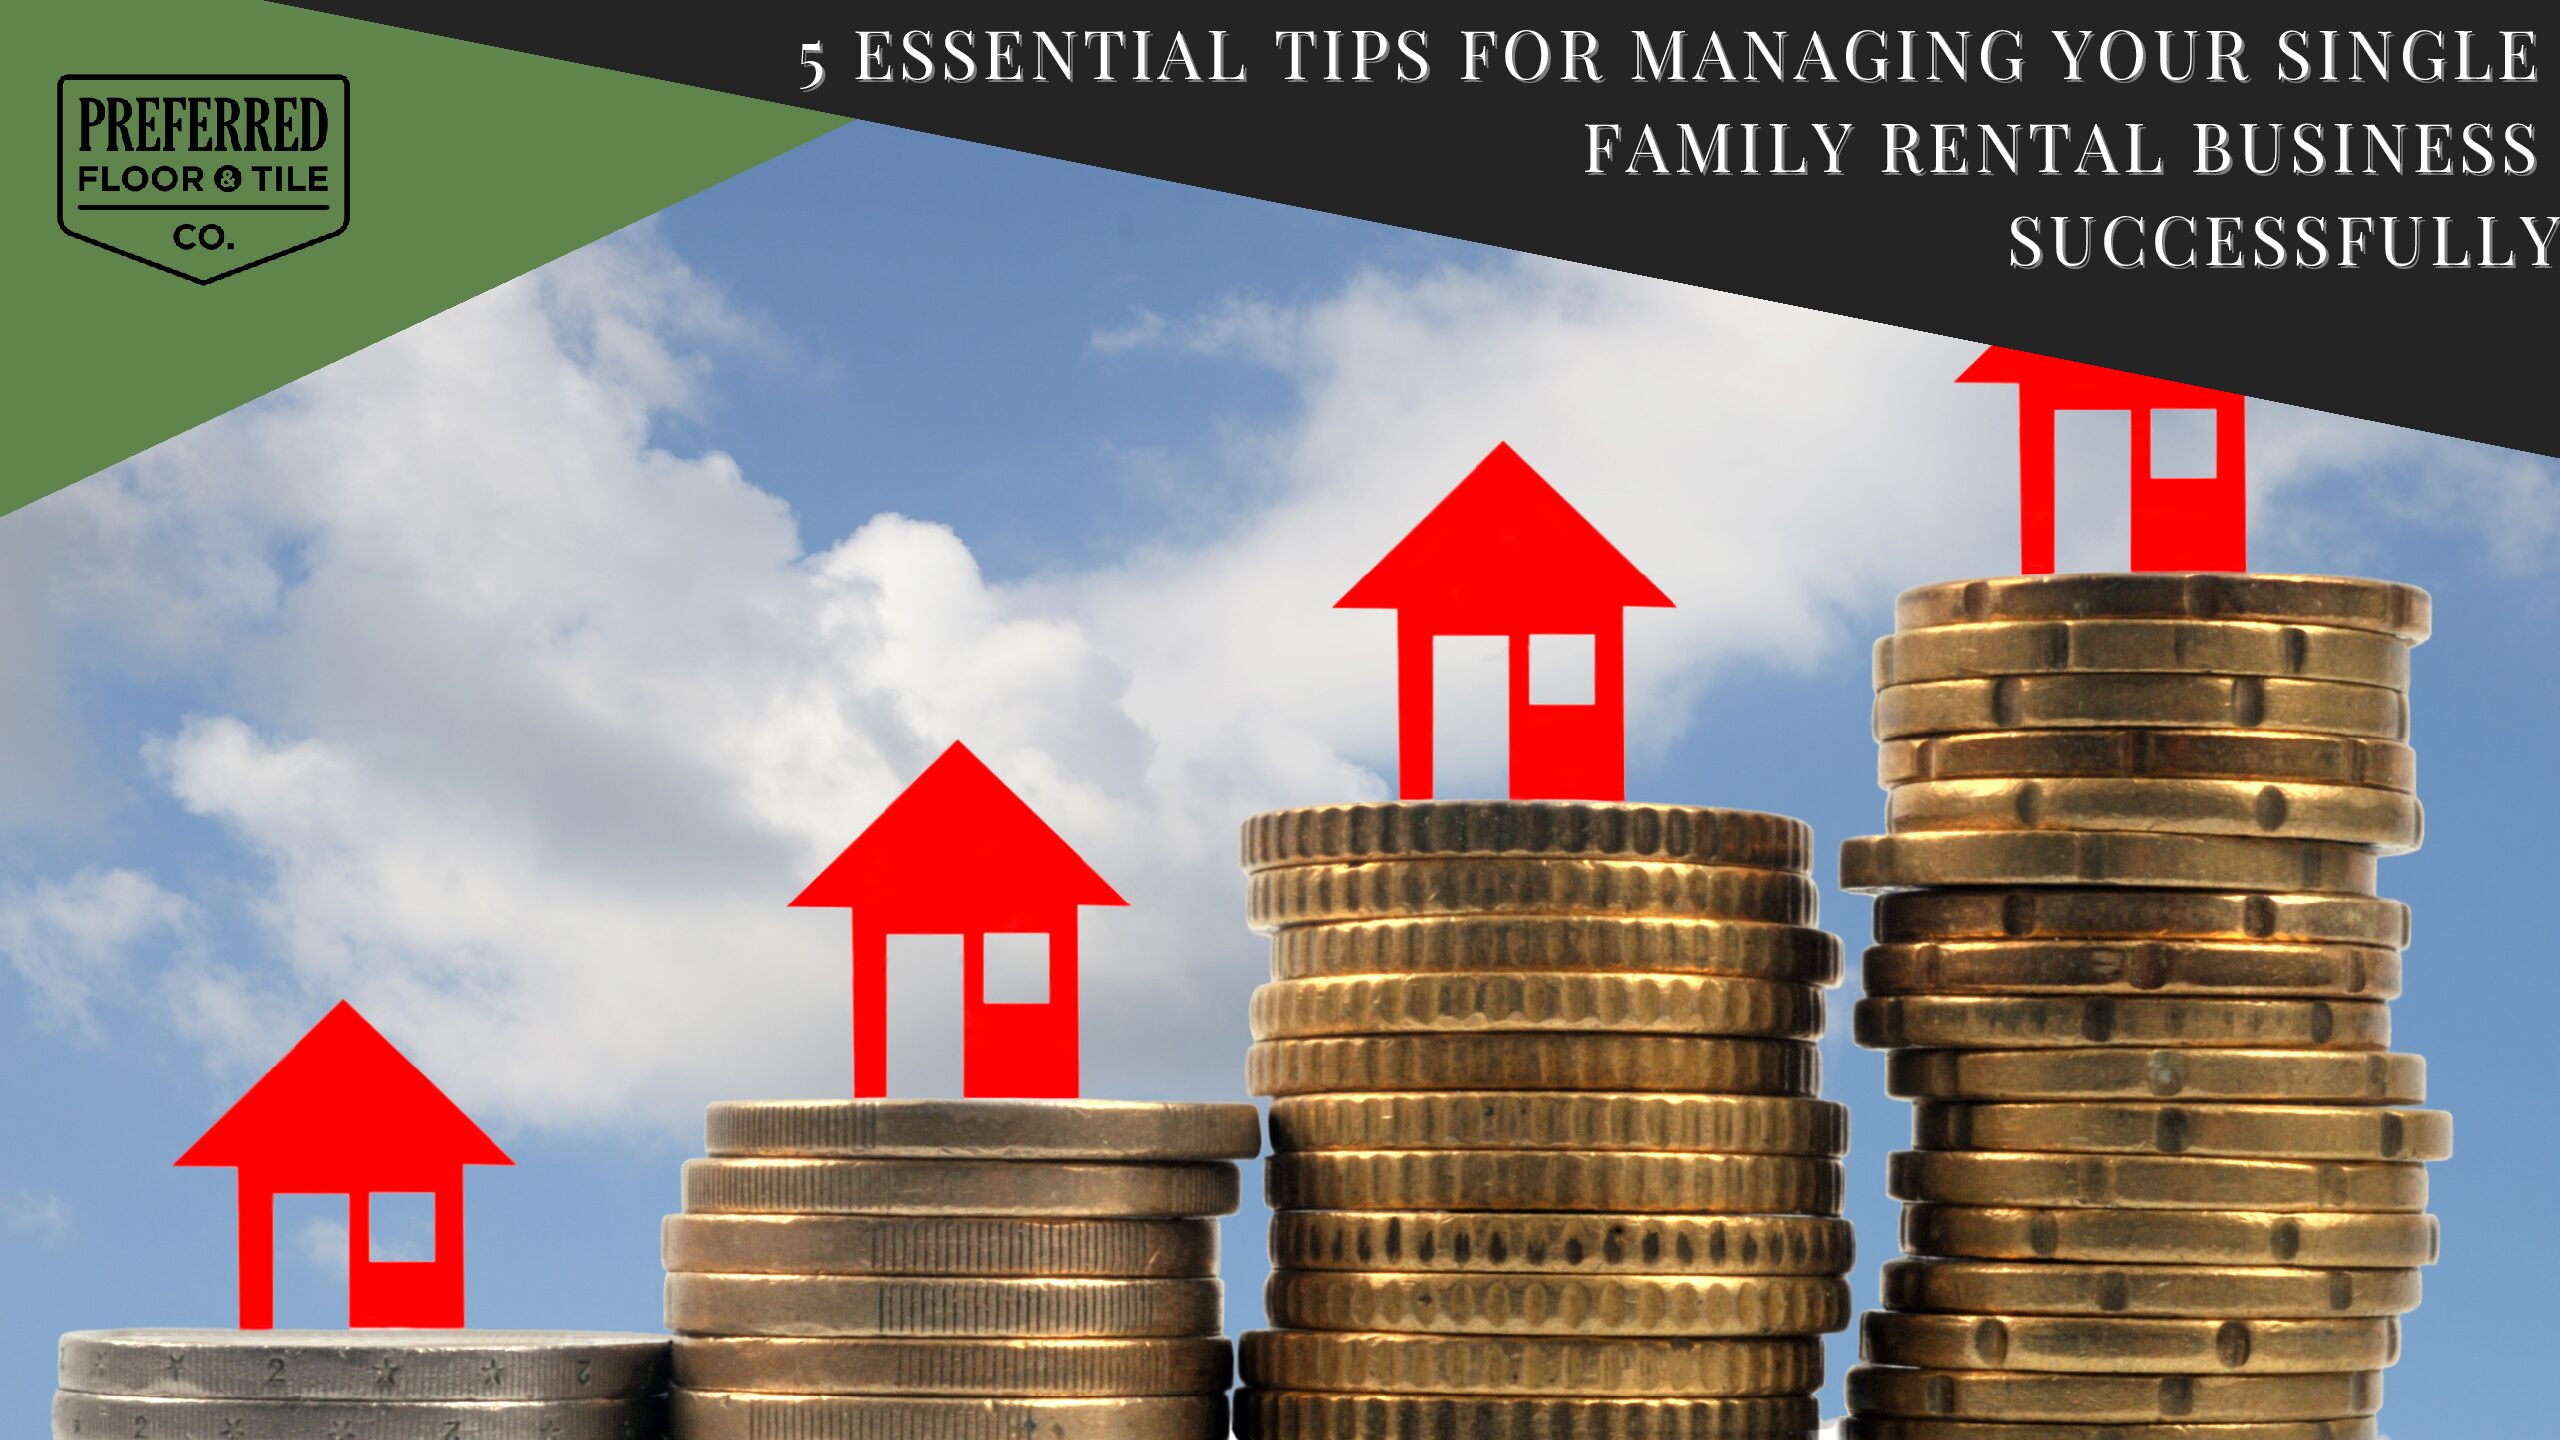 5 Essential Tips for Managing Your Single Family Rental Business Successfully